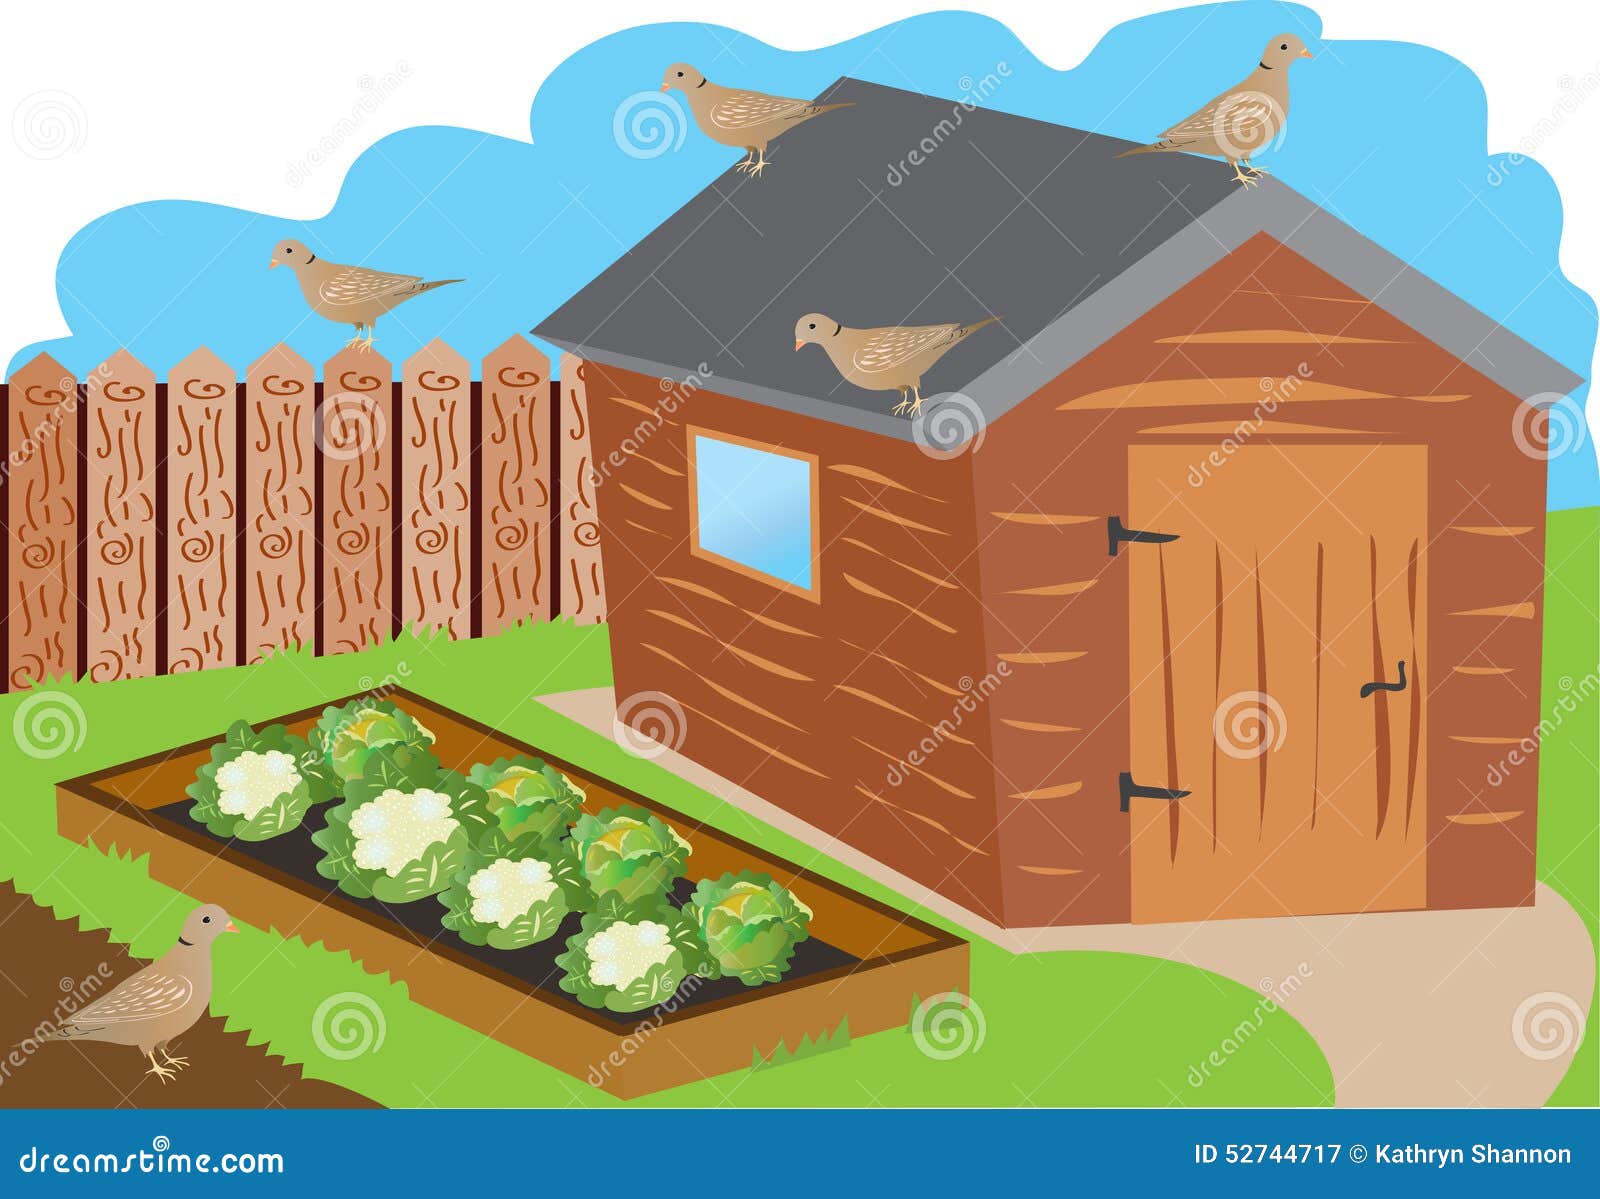 An illustration of a fenced allotment garden with shed,raised 